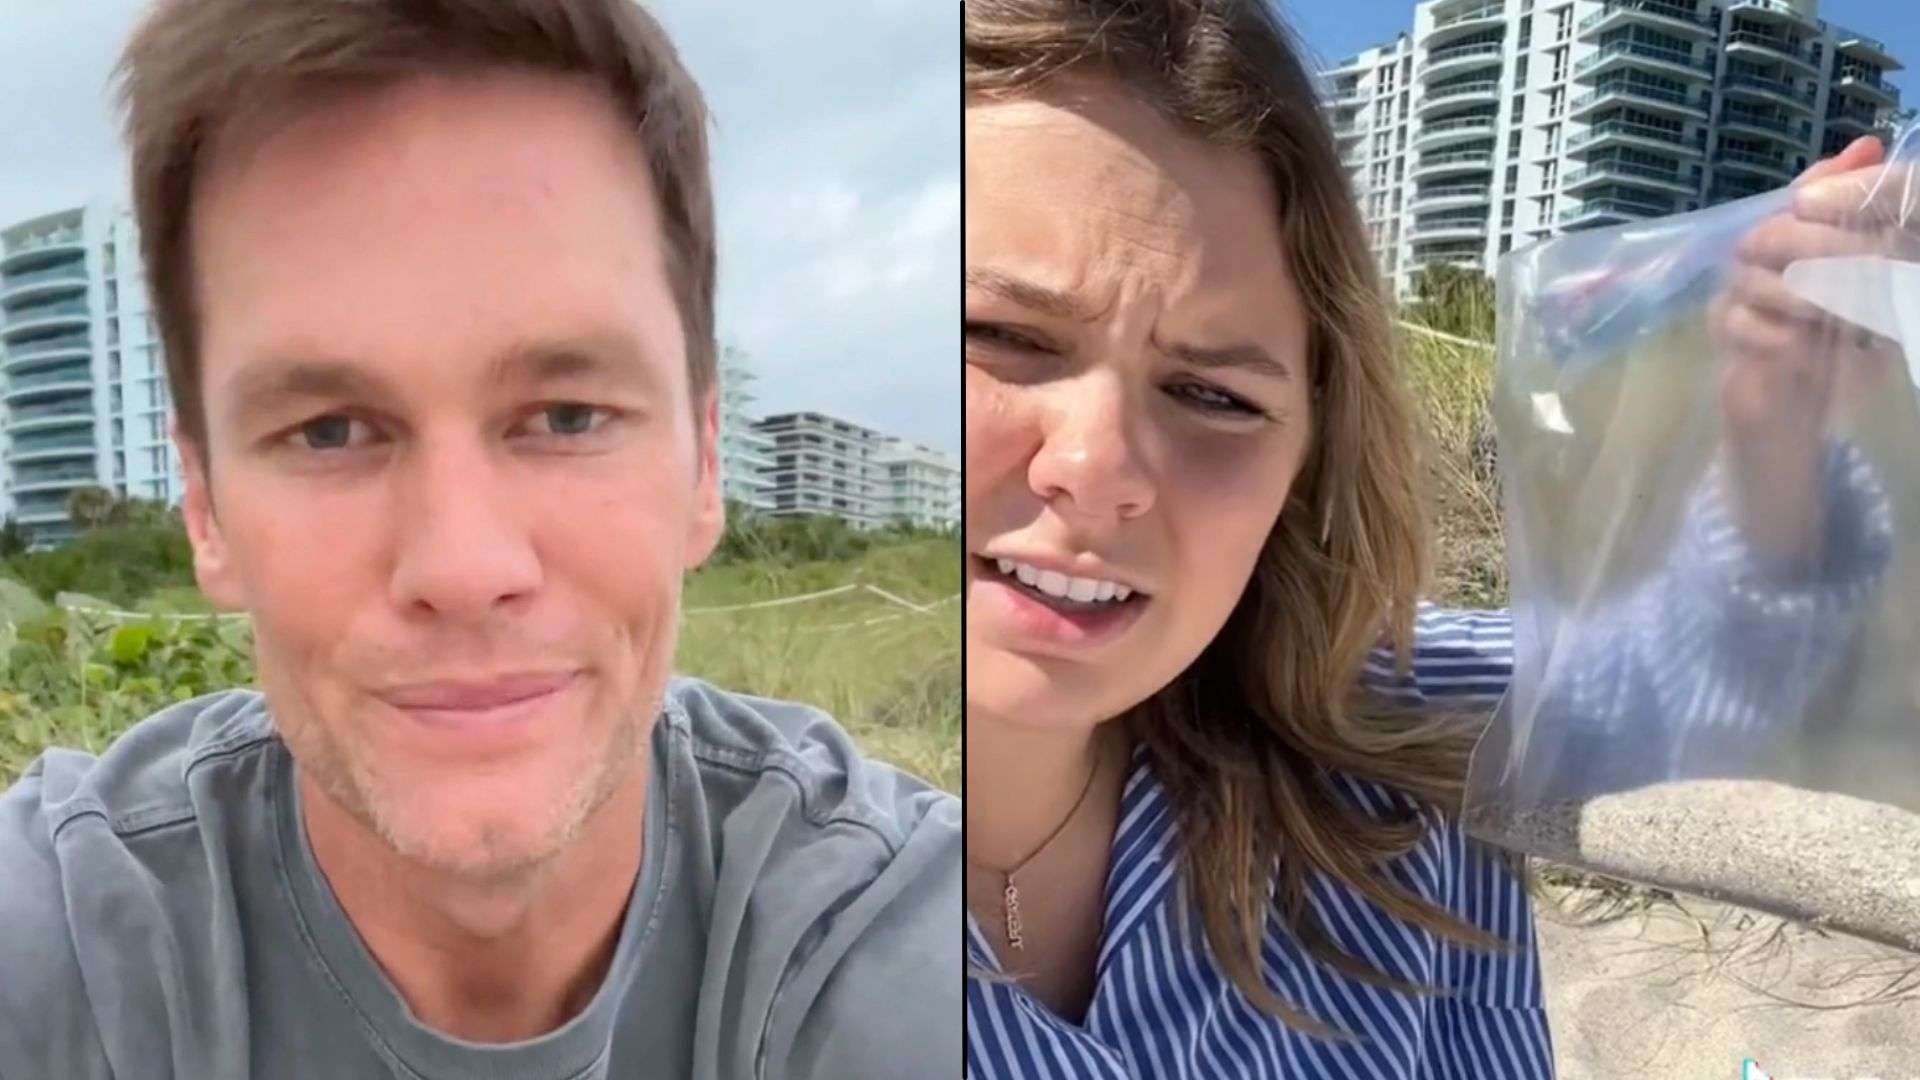 Tom Brady sat on beach in retirement video side-by-side with woman holding bag of sand